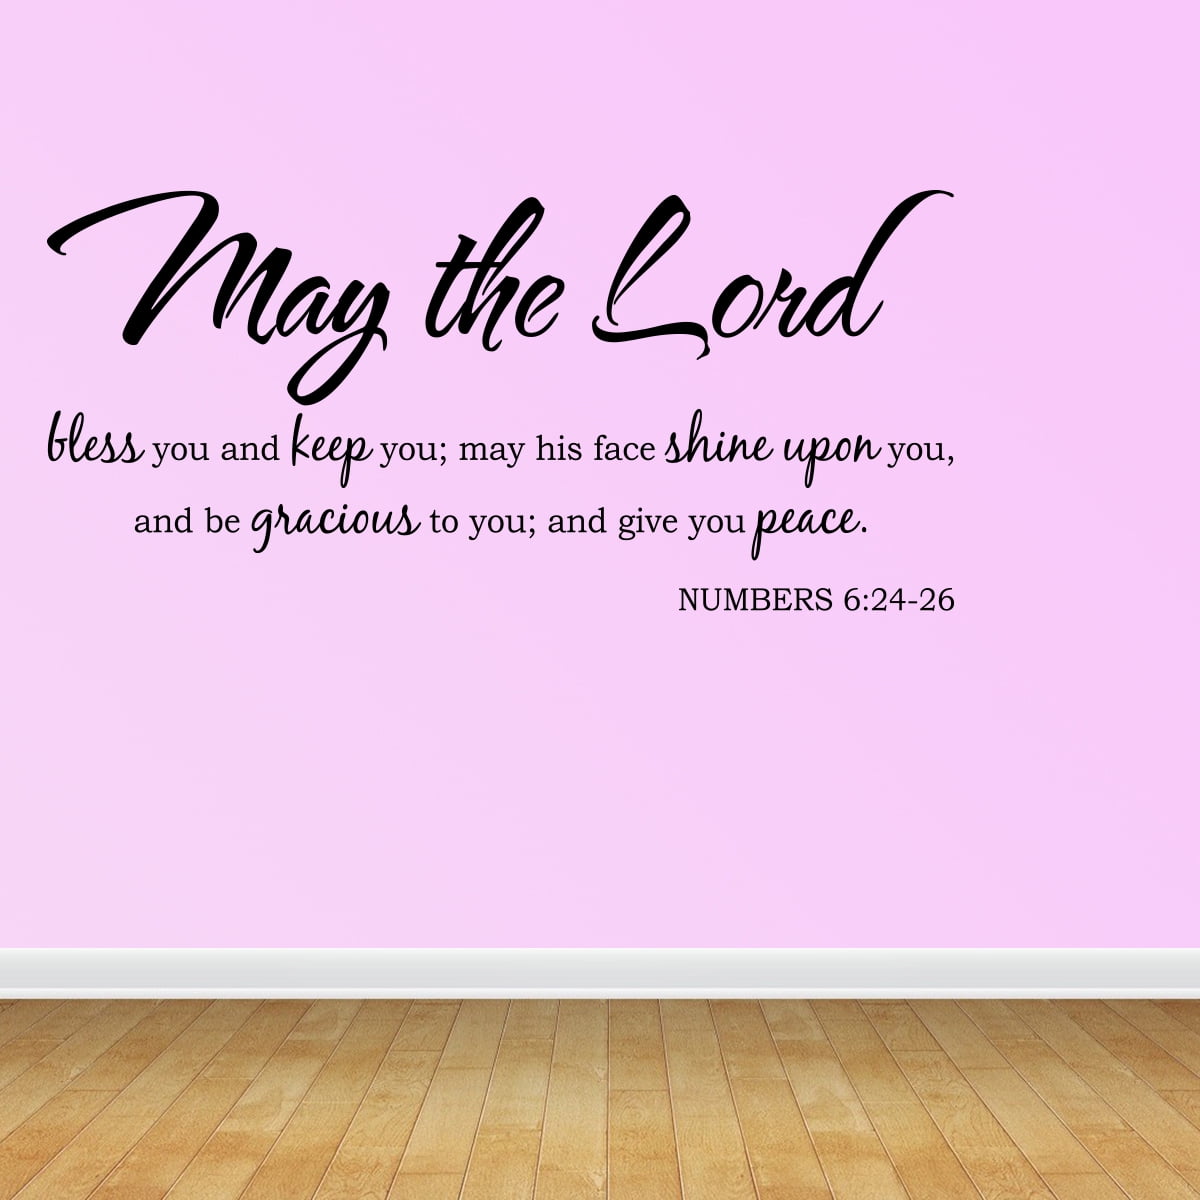 Wall Decal Quote May The Lord Bless You And Keep You Scripture Bible Verse R49 Walmart Com Walmart Com